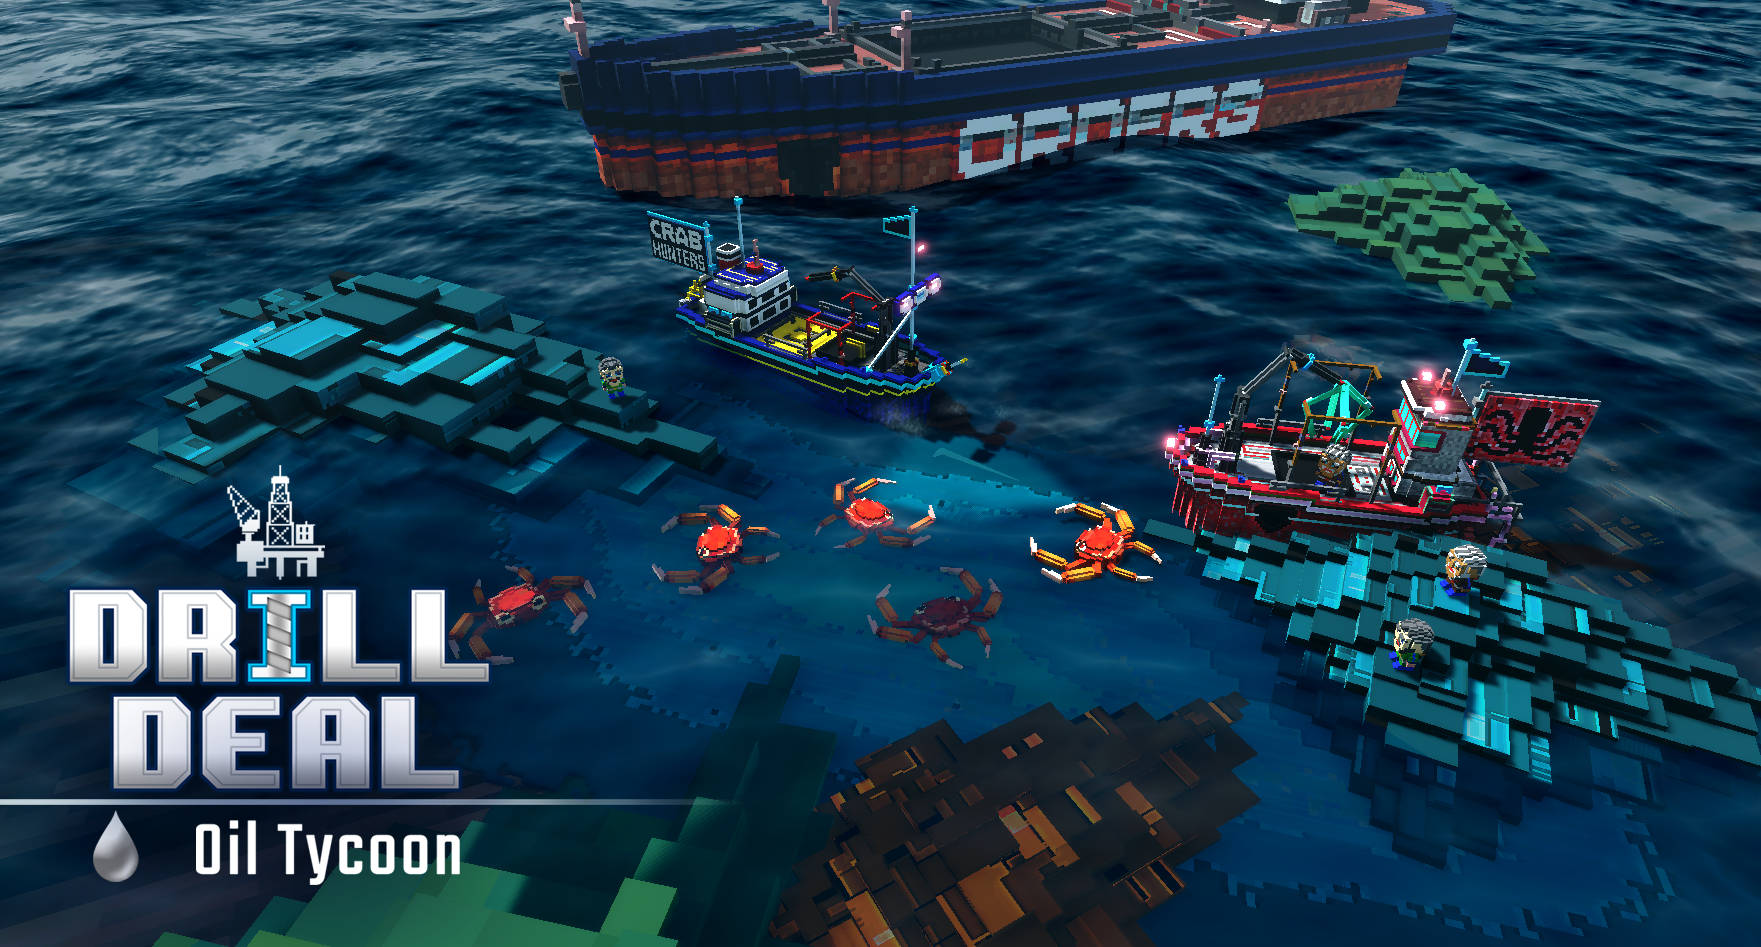 Drill Deal – Oil Tycoon EN - Game Localizations